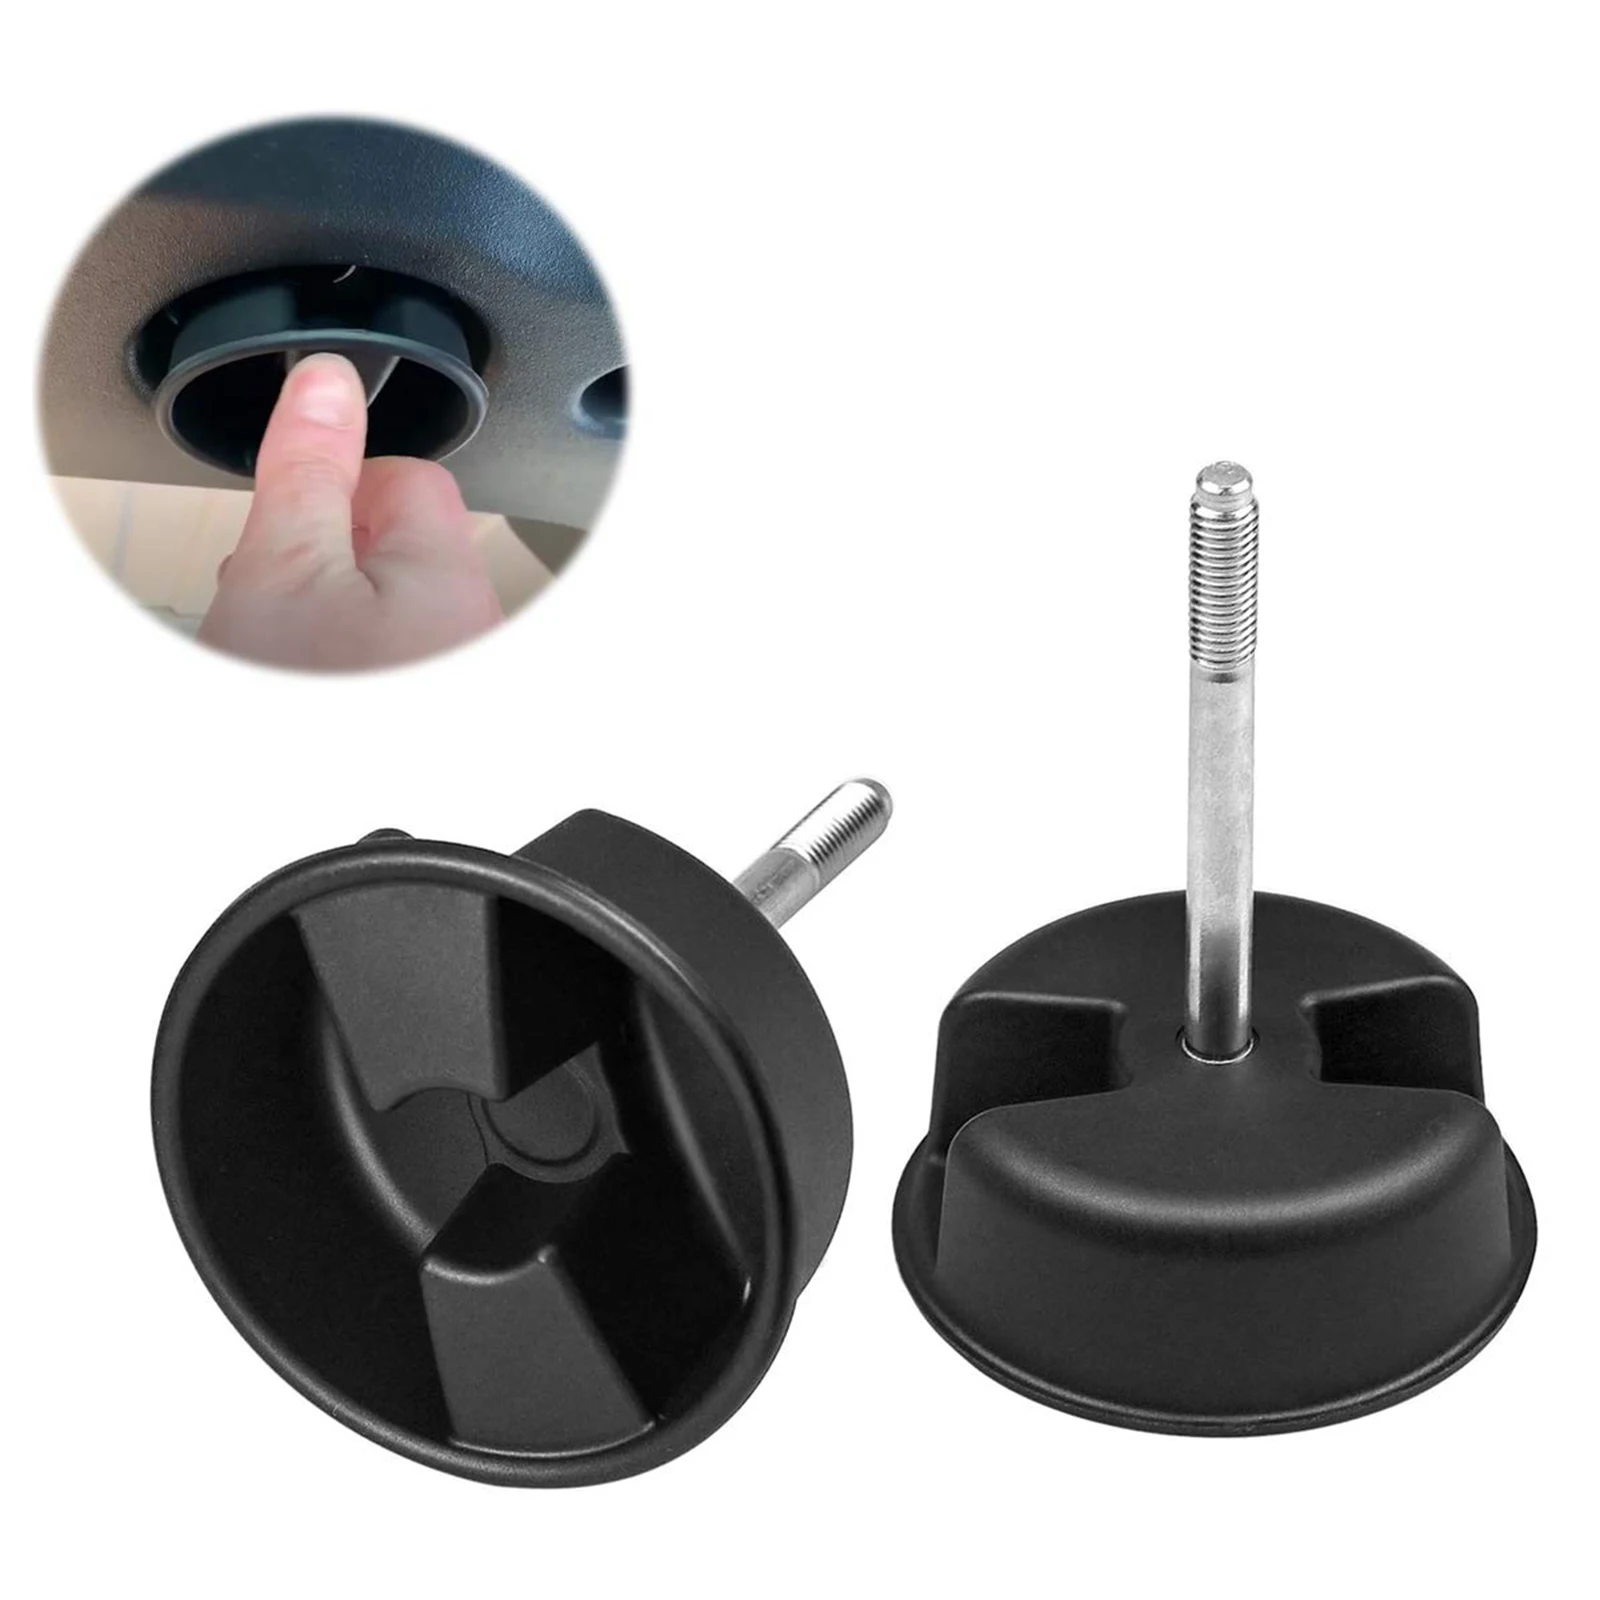 Hard Top Panel Mounting Screw Knob Replacement for Jeep Wrangler JK 2dr Unlimited 4dr 2007-2018 1CJ57DX9AC